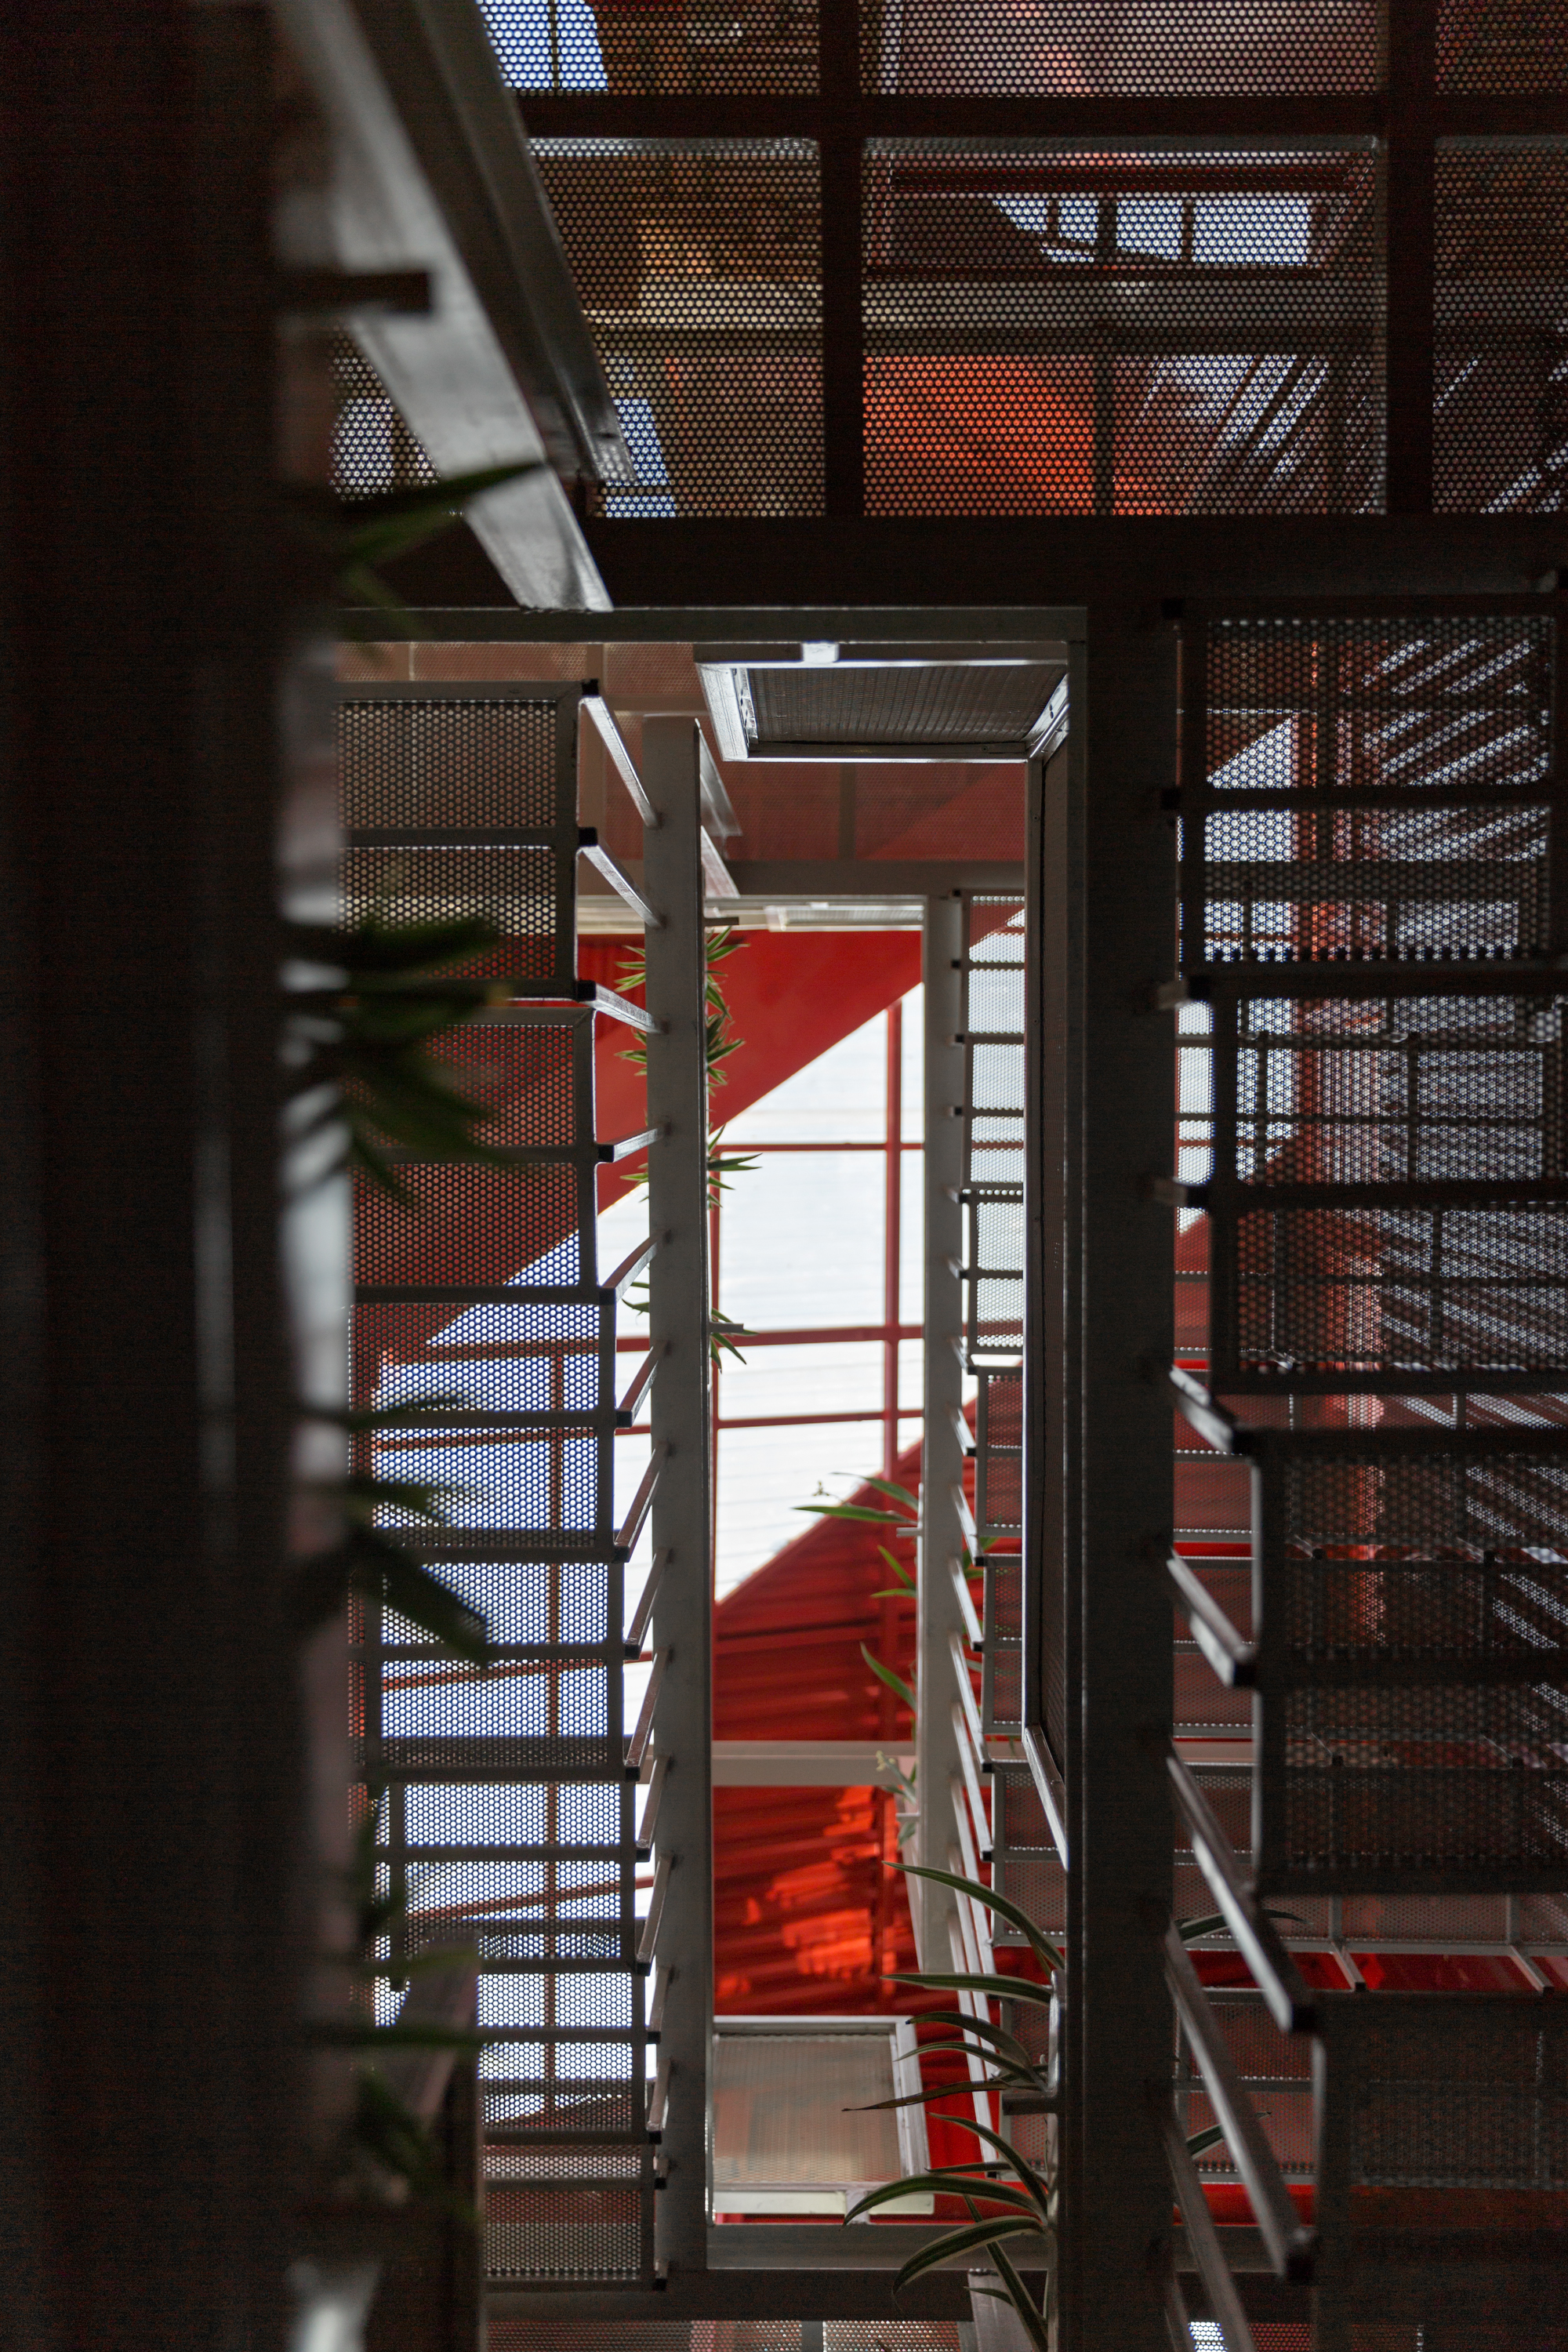 Gallery of Red Mirror Strips / Wise Architecture - 2